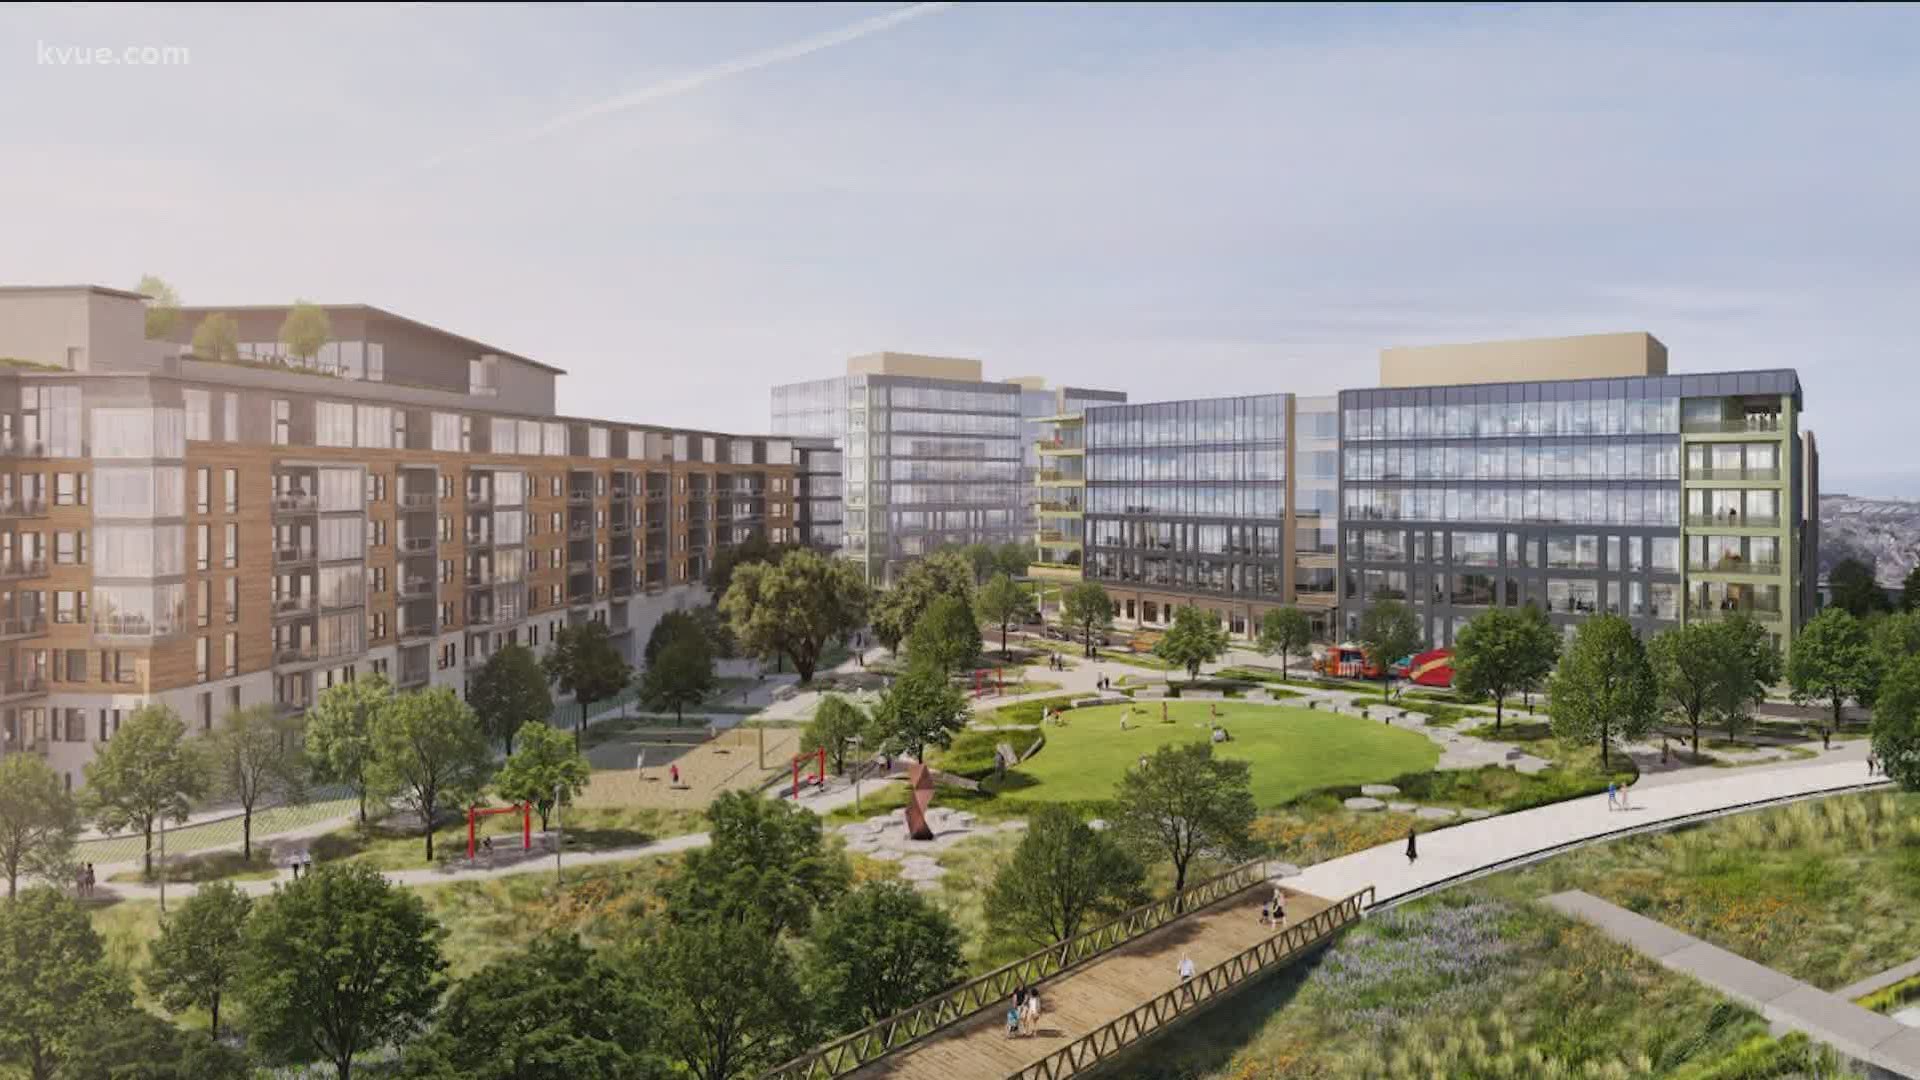 We're getting a first look at what part of a massive development planned for East Riverside Drive in southeast Austin will look like.